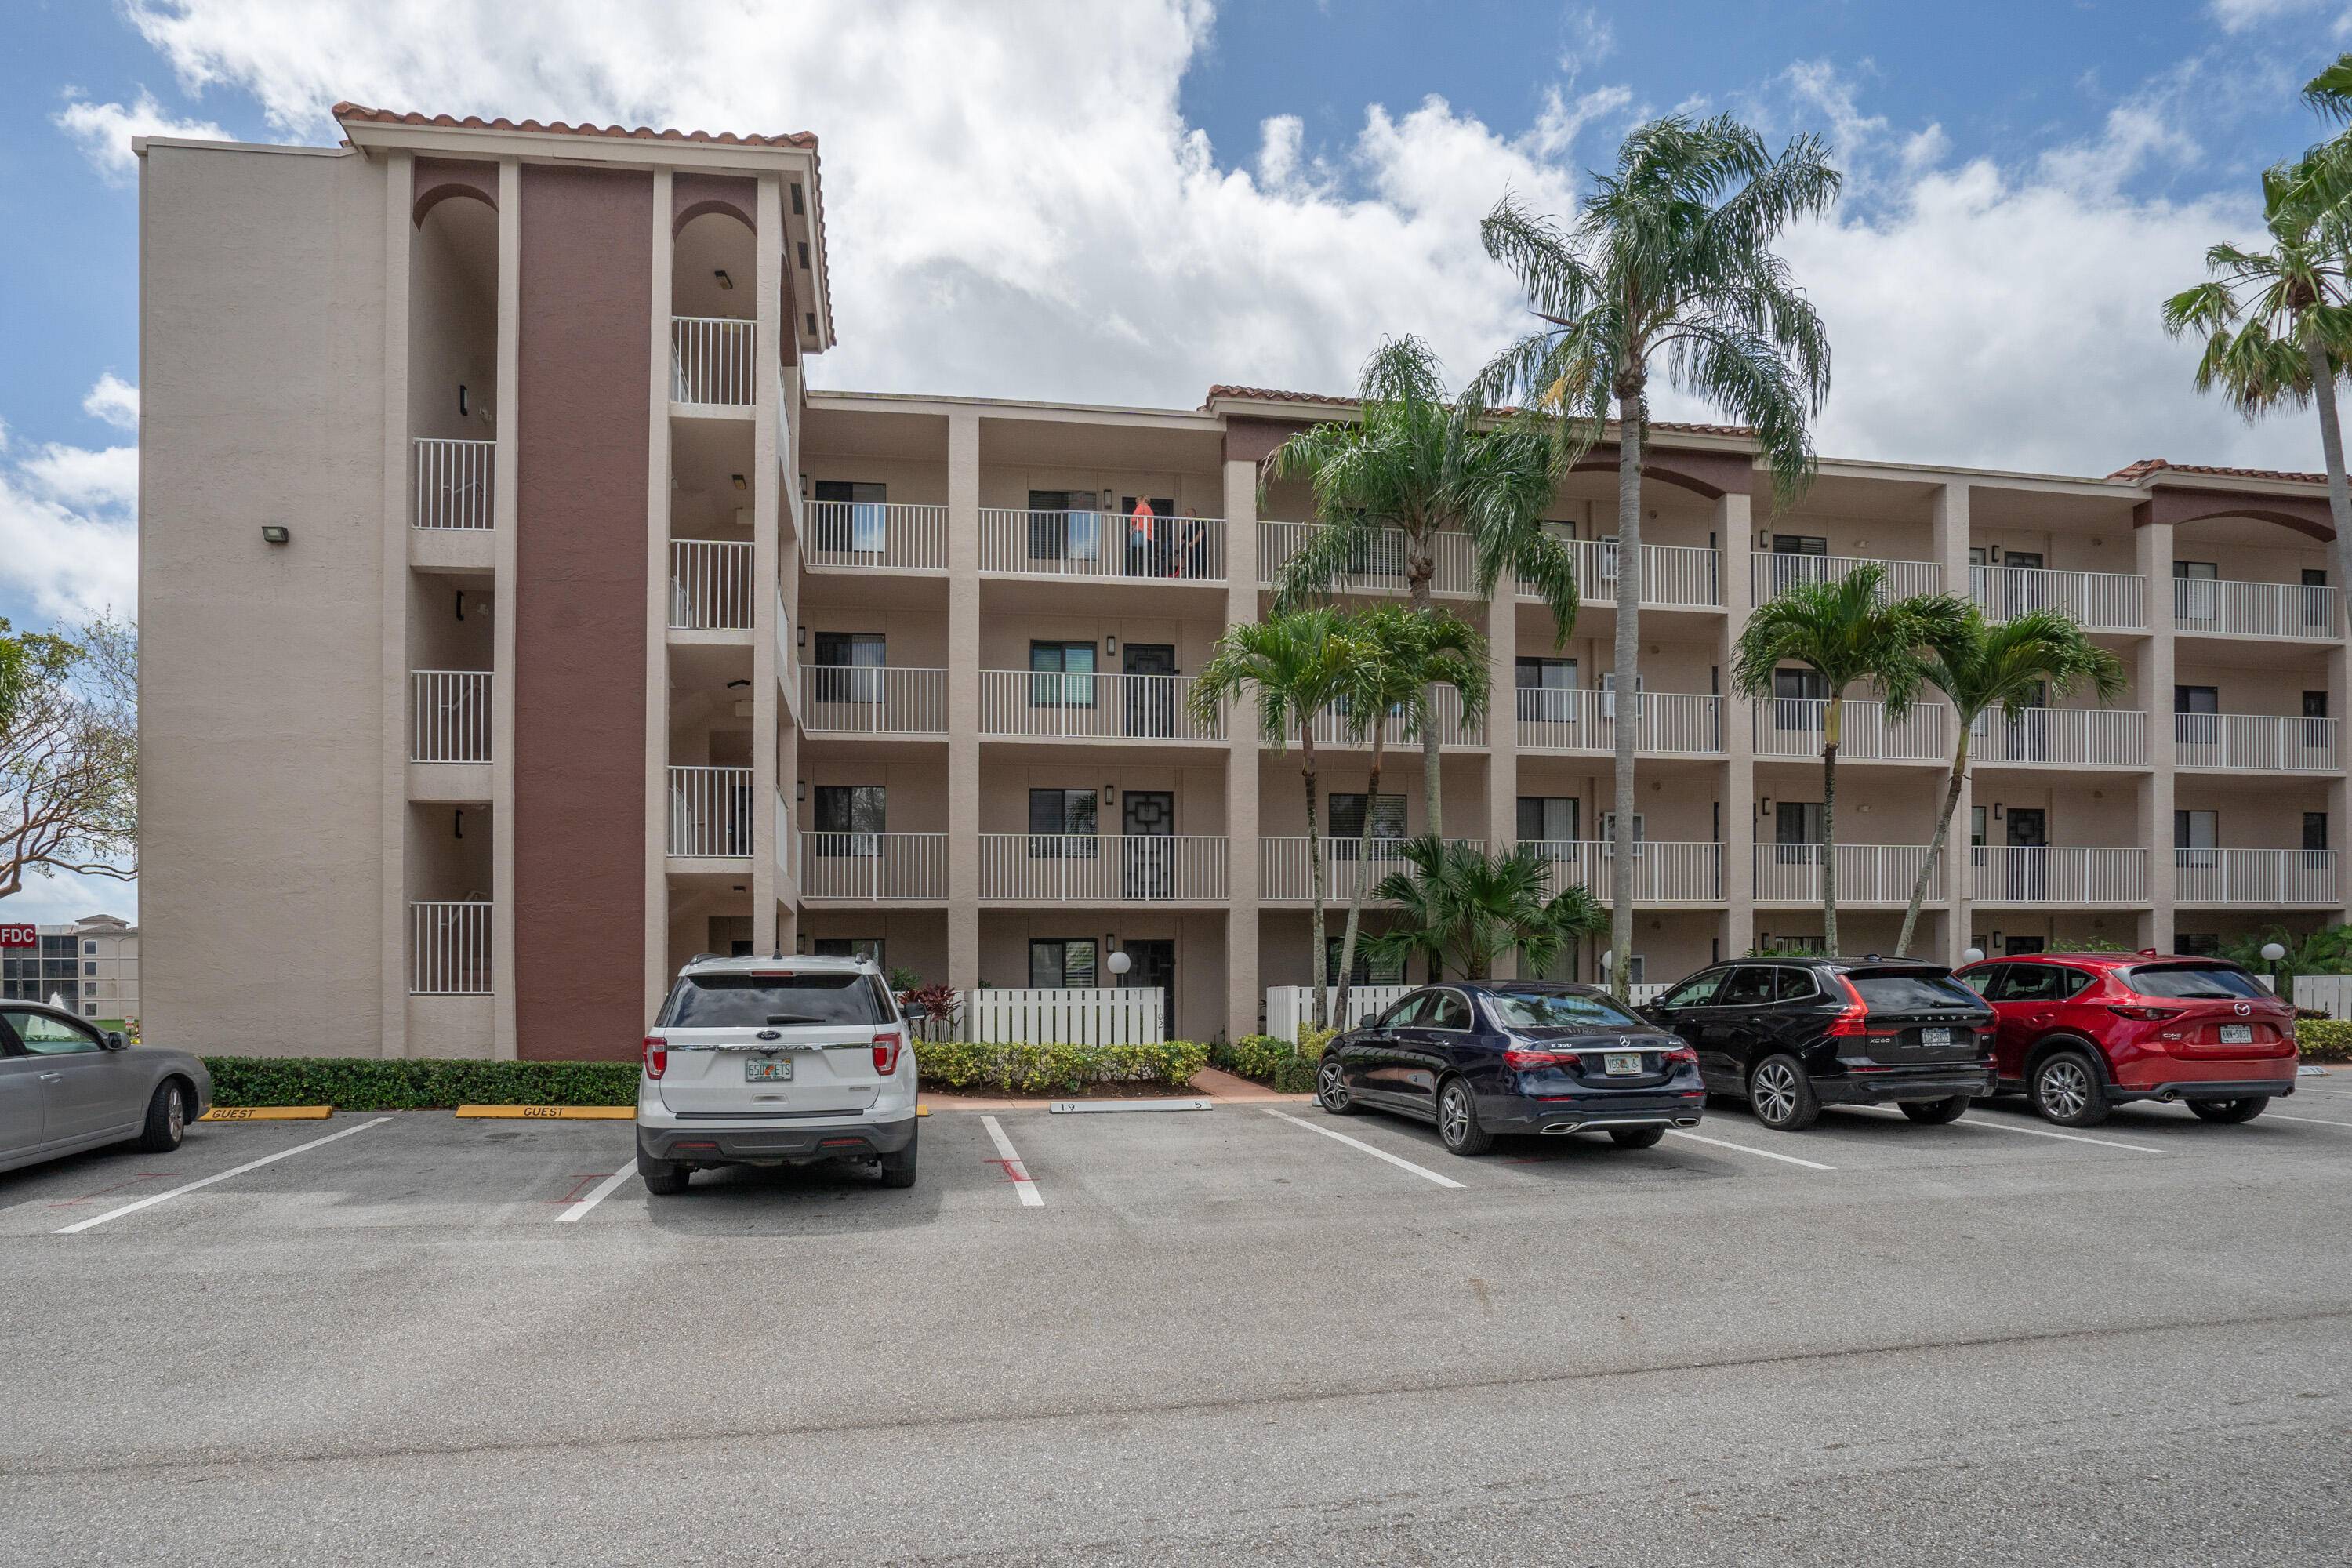 Fabulous opportunity to own a light, bright fourth floor corner condo in building 119, directly across the street from the clubhouse.